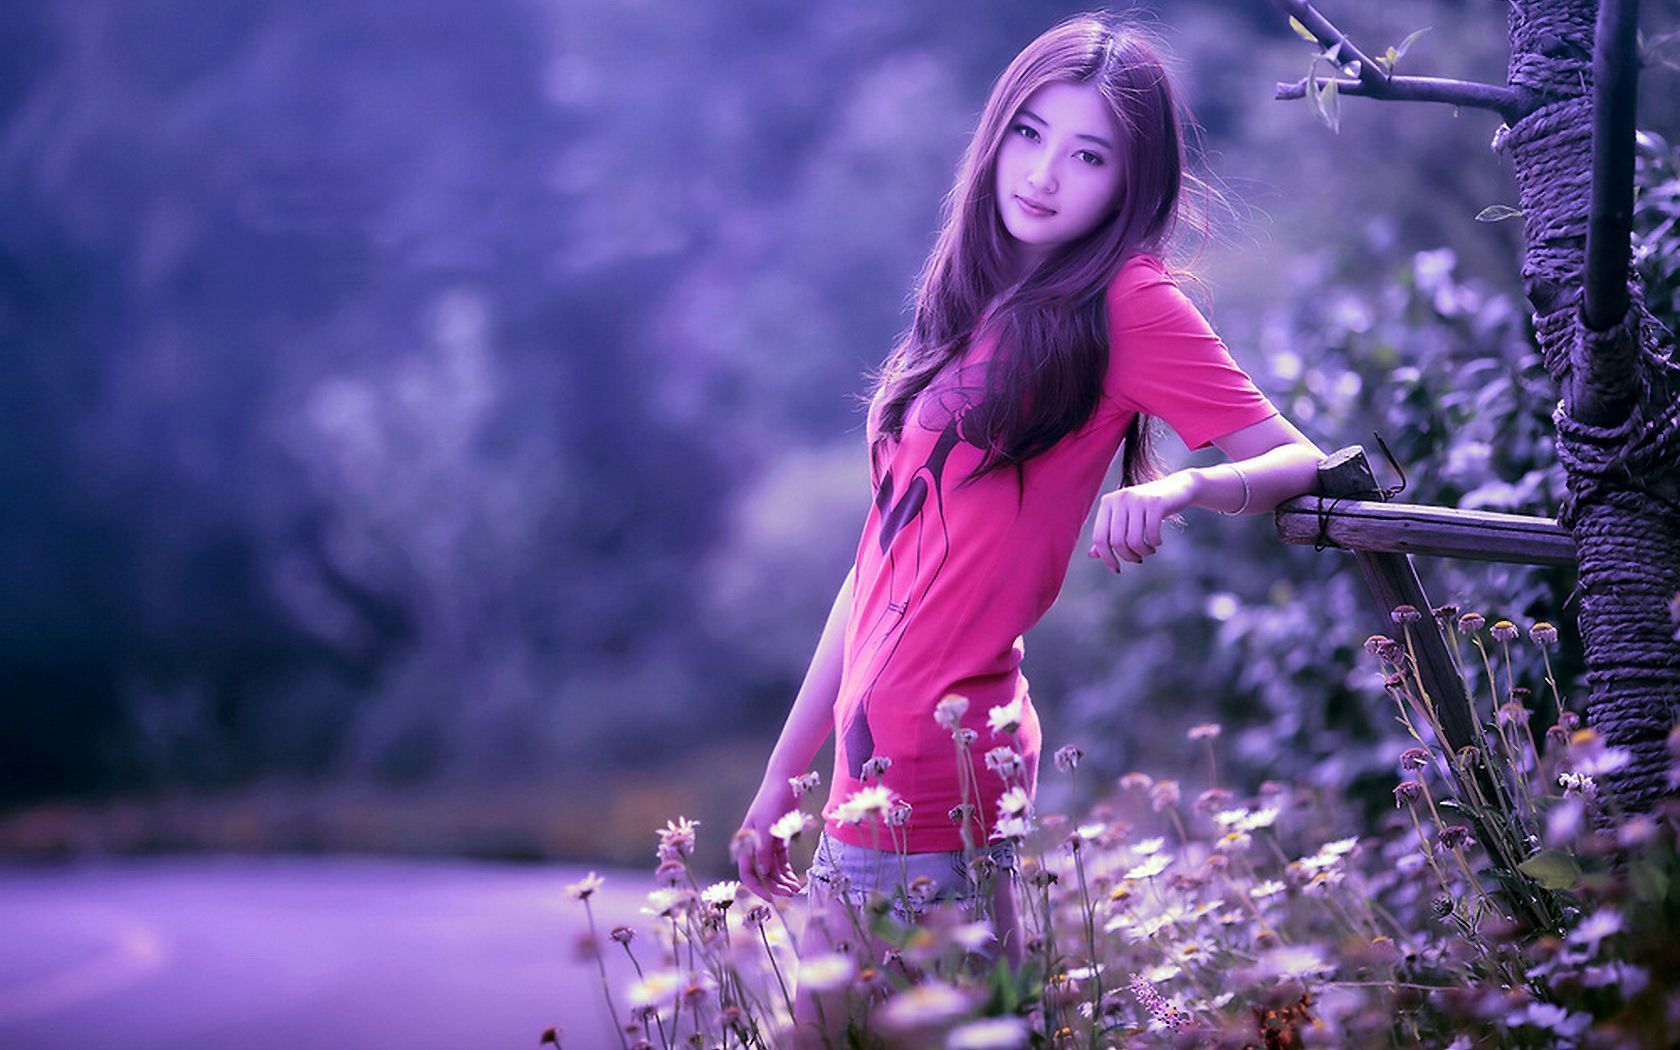 Girl in Casual Clothes and Hair Style Standing Among Flowers and other